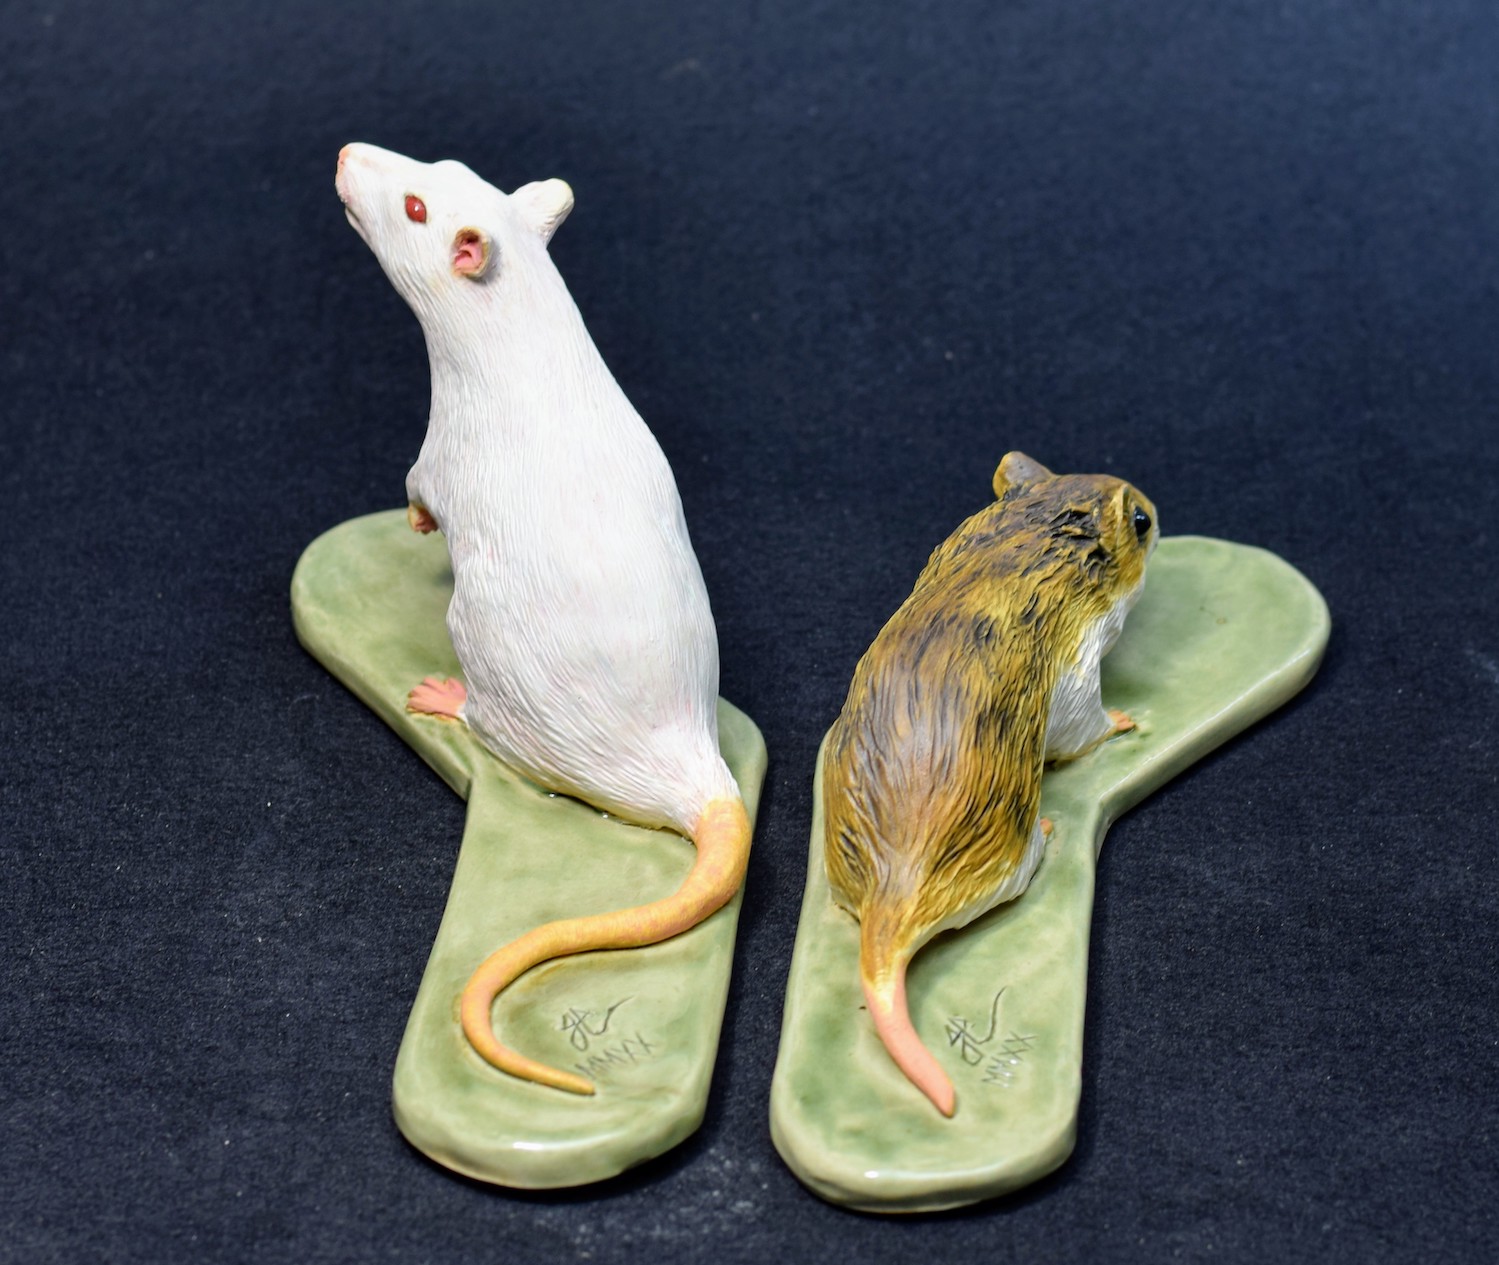 Chinese Hamster and Lab Rat